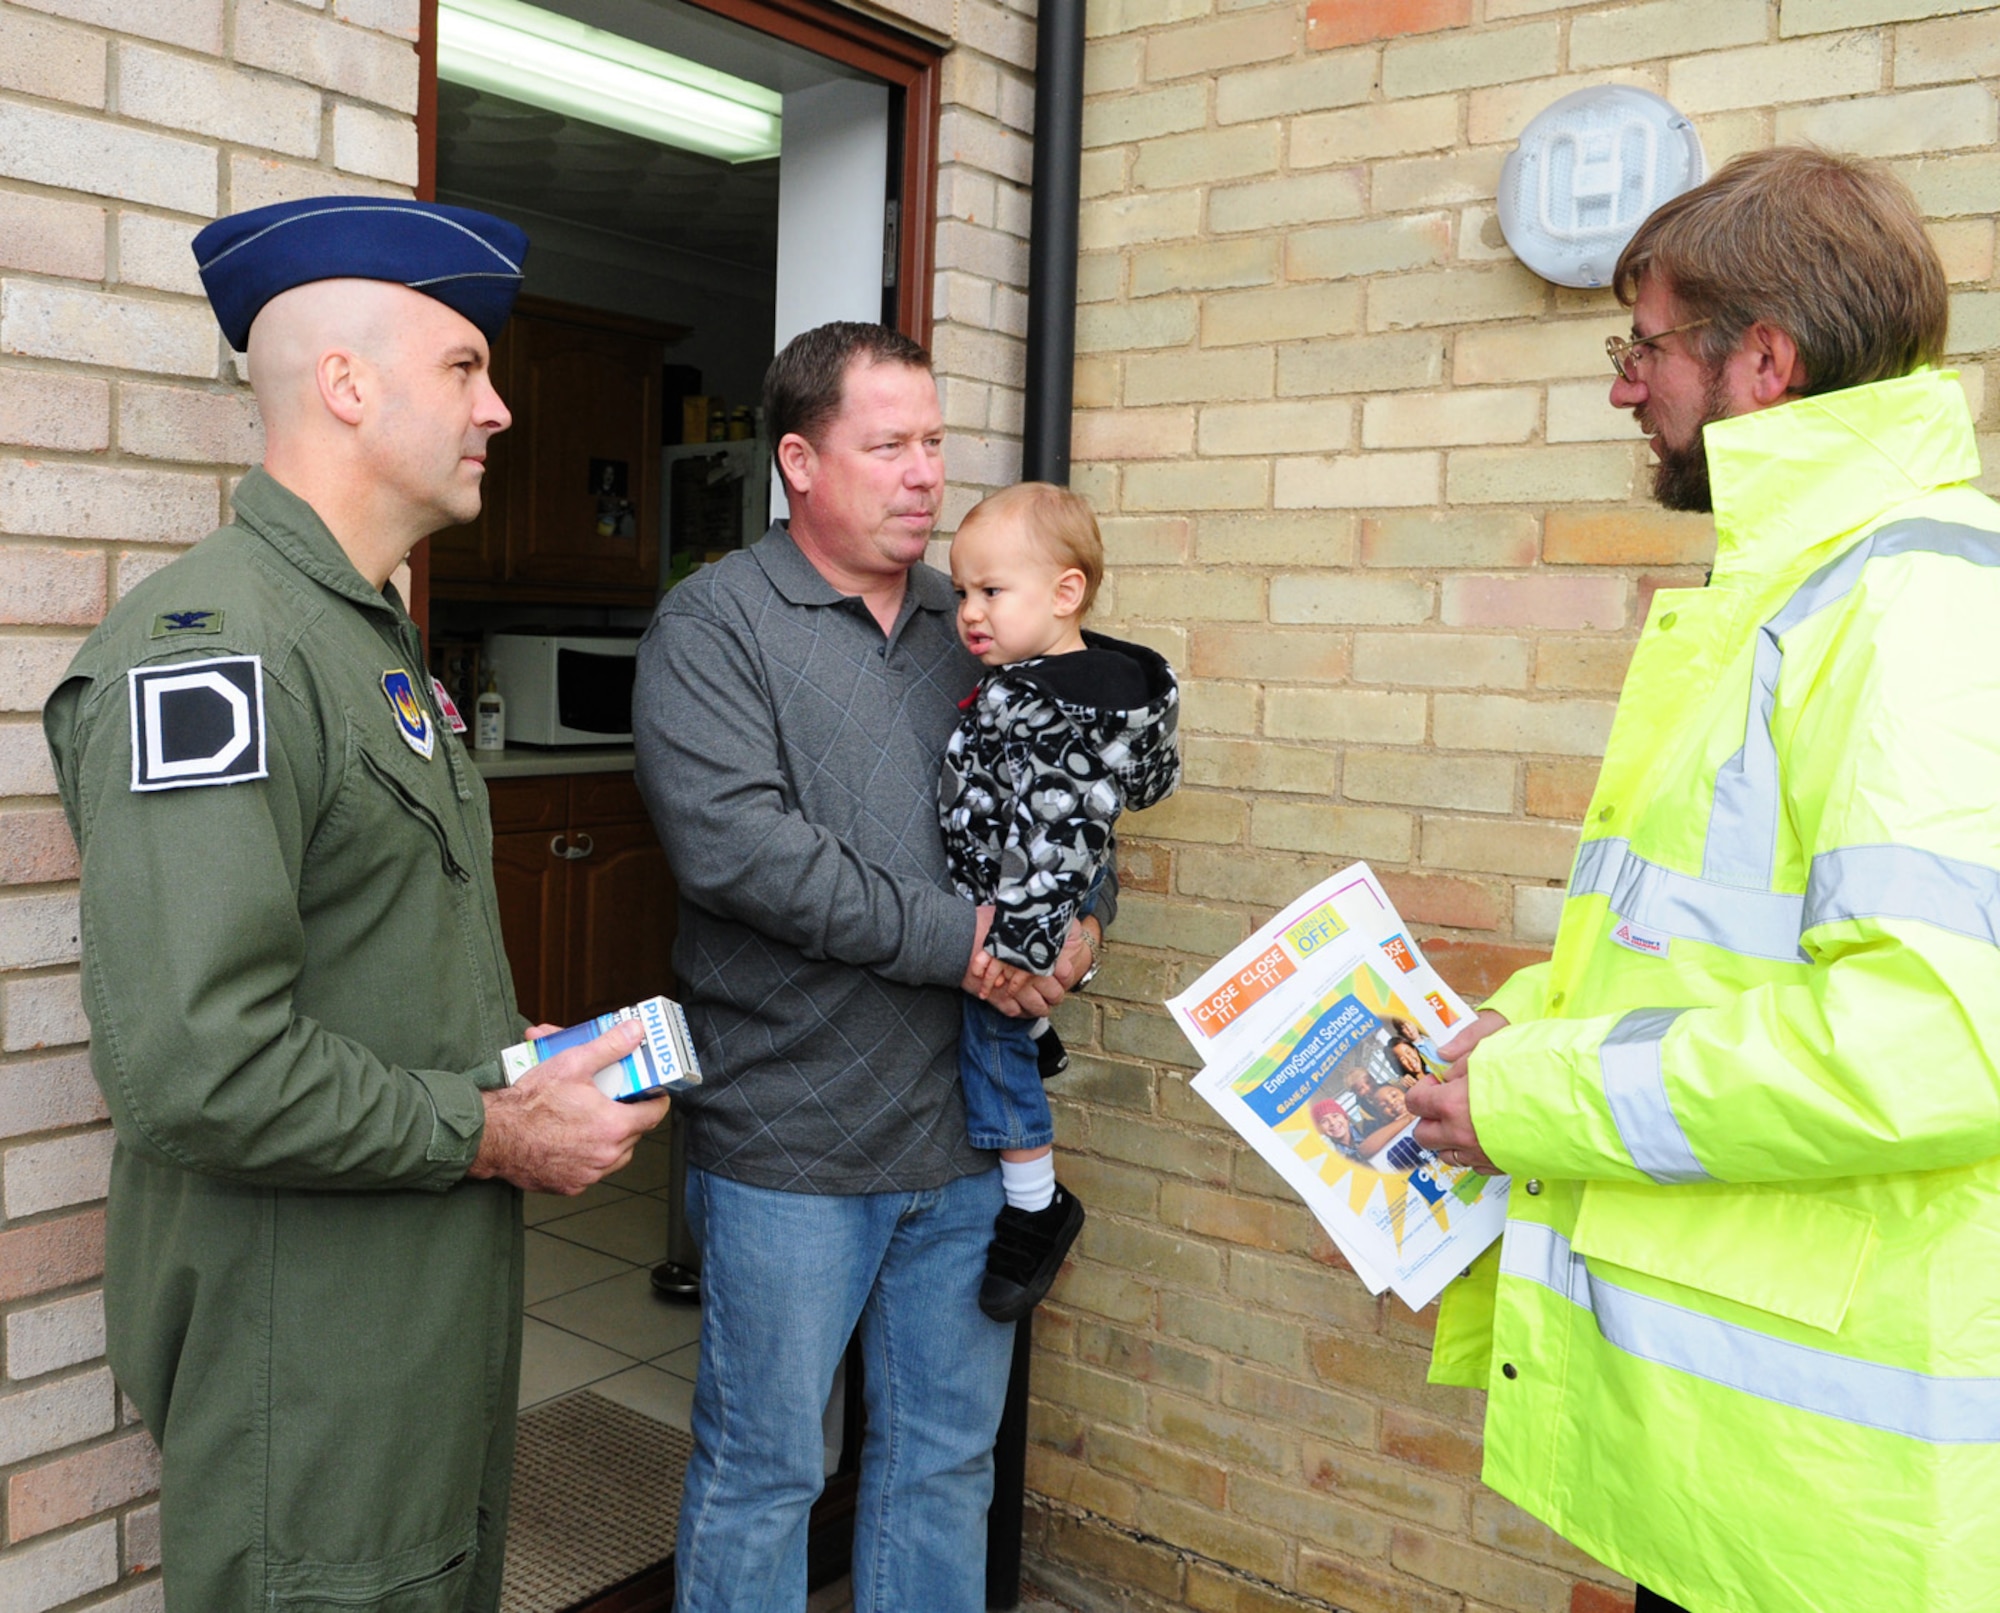 RAF MILDENHALL, England -- Steve Perry, RAF Mildenhall base energy manager, (right) chats with Simon Cooke, dependent of an RAF Lakenheath member, and son Michael, 20 months, before Col. Chad Manske, (left) 100th Air Refueling Wing commander, presents him with a free energy-saving lightbulb as part of Energy Awareness Month Oct. 15. The 100th Civil Engineer Squadron is providing energy- efficient lightbulbs to all those who live in base housing on RAF Mildenhall. (U.S. Air Force photo/Karen Abeyasekere)